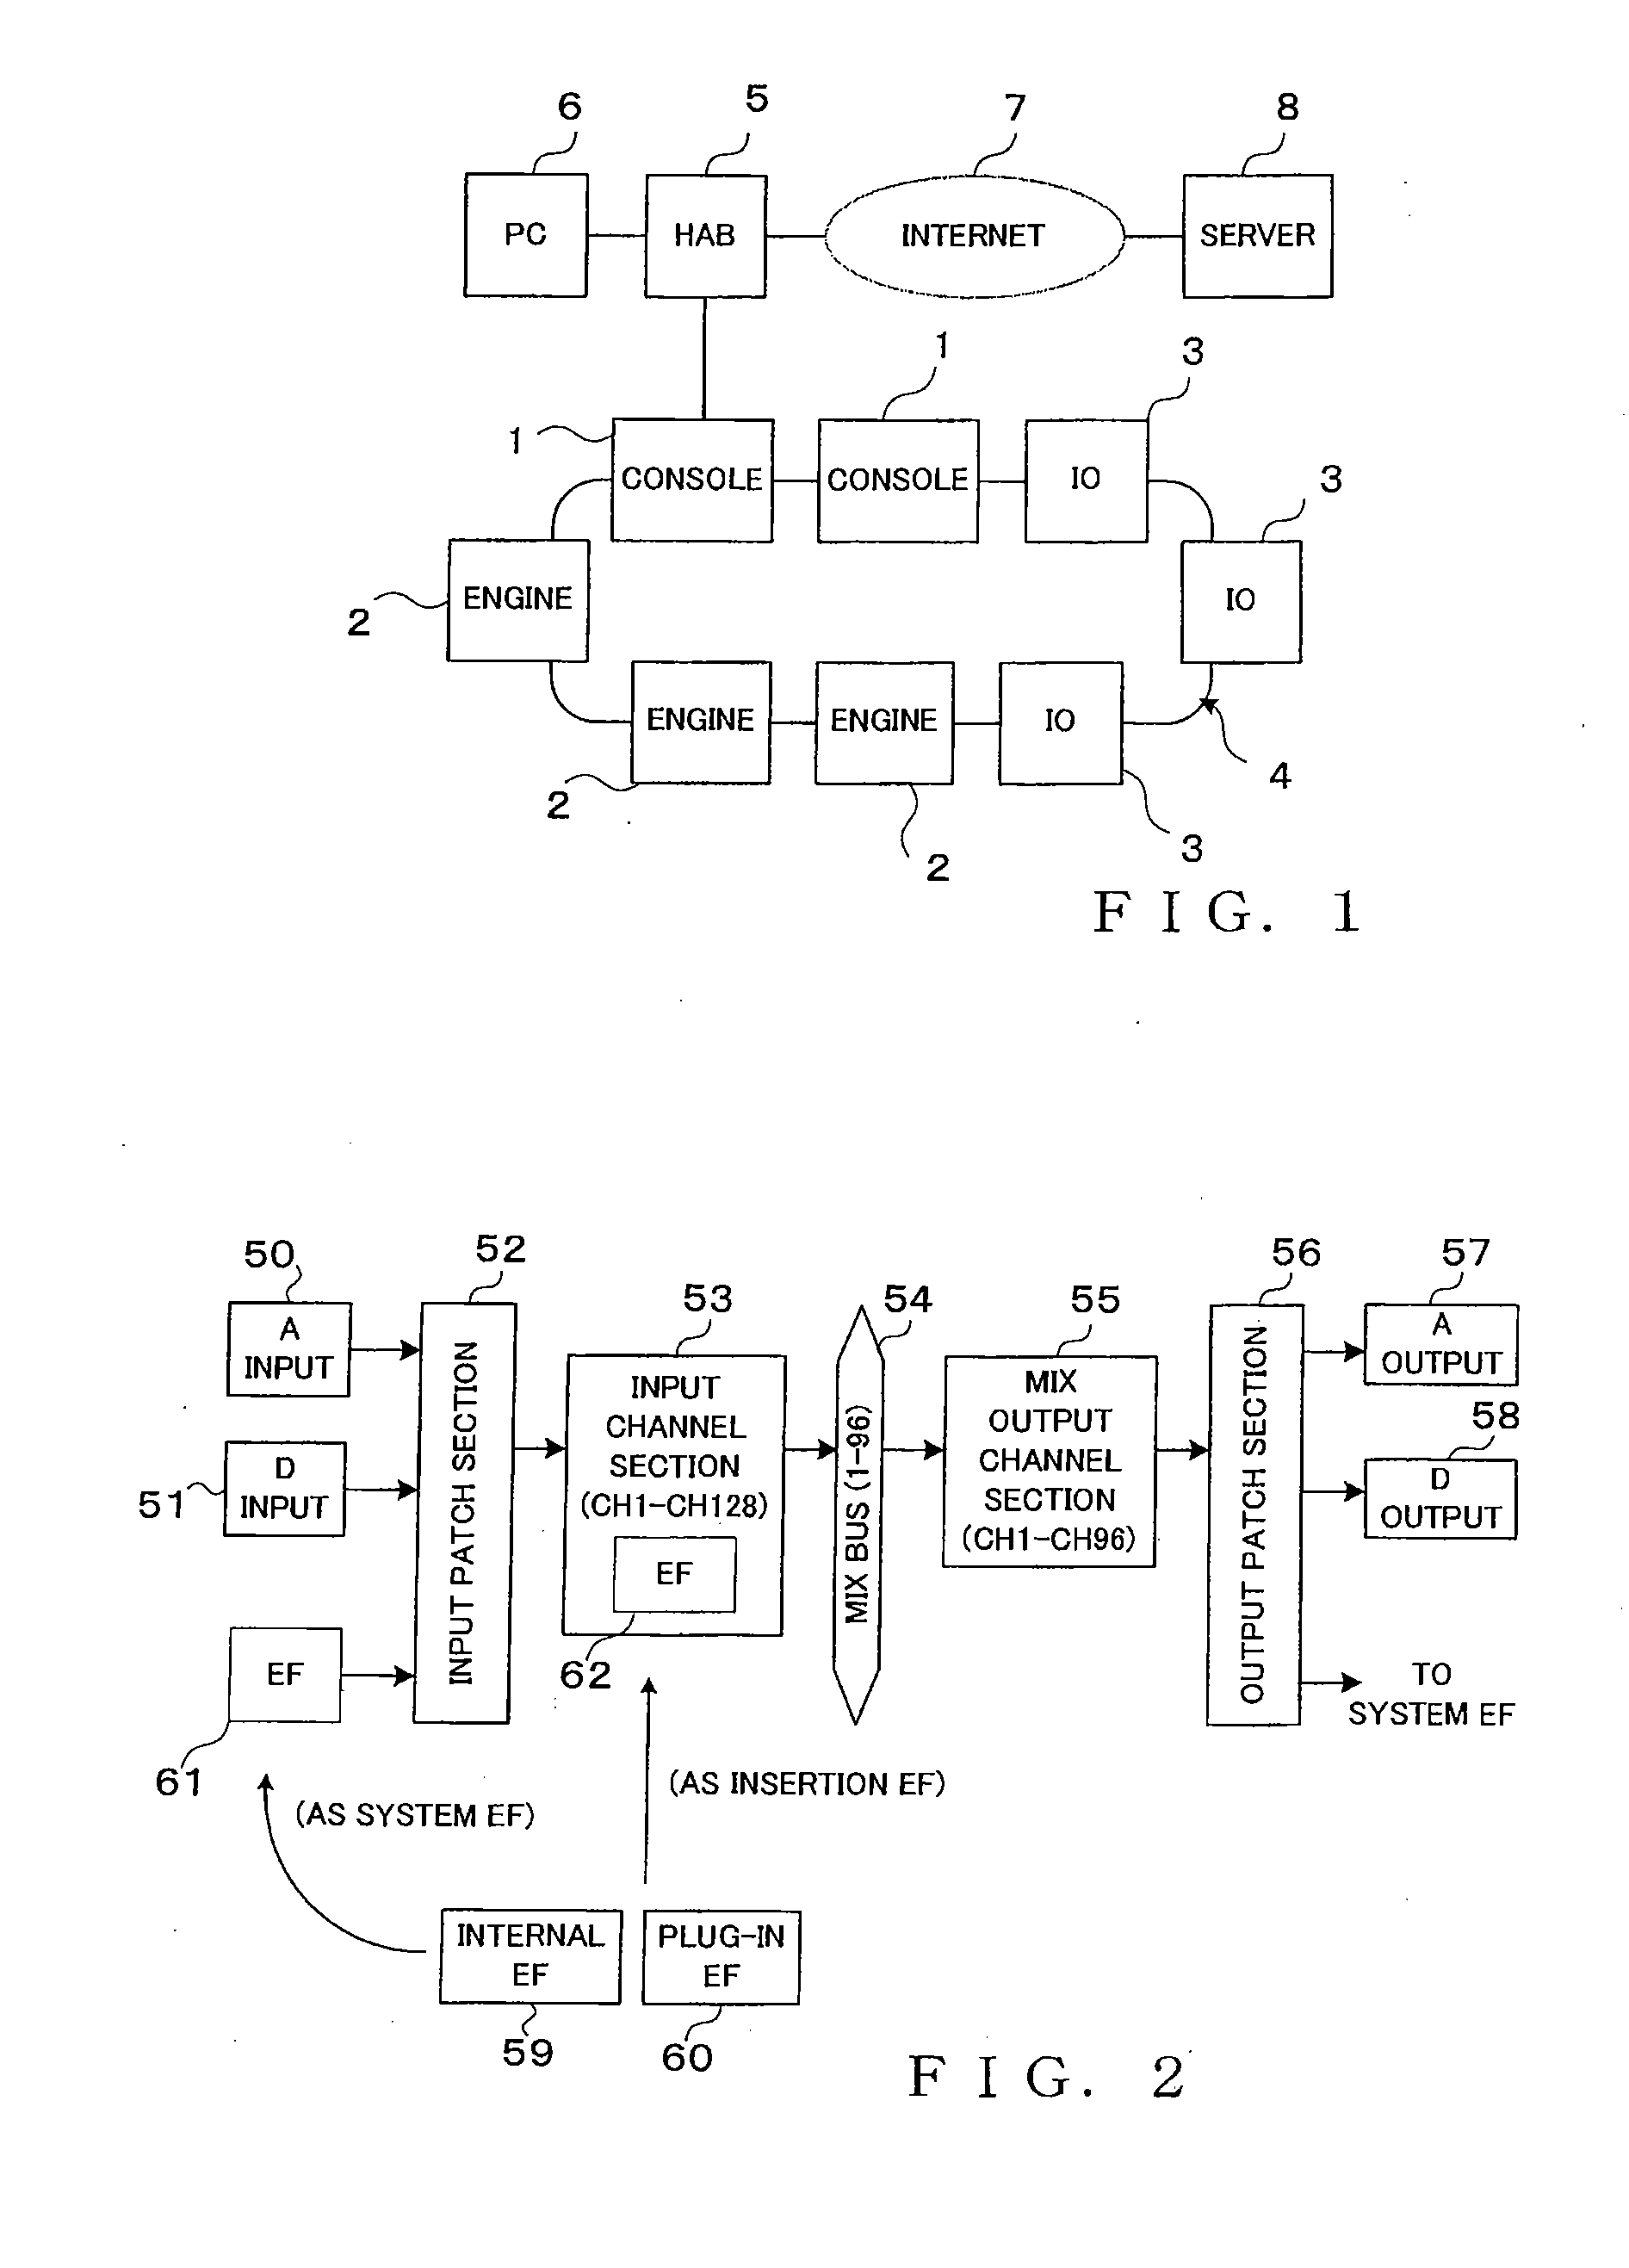 Controlling activation of an application program in an audio signal processing system